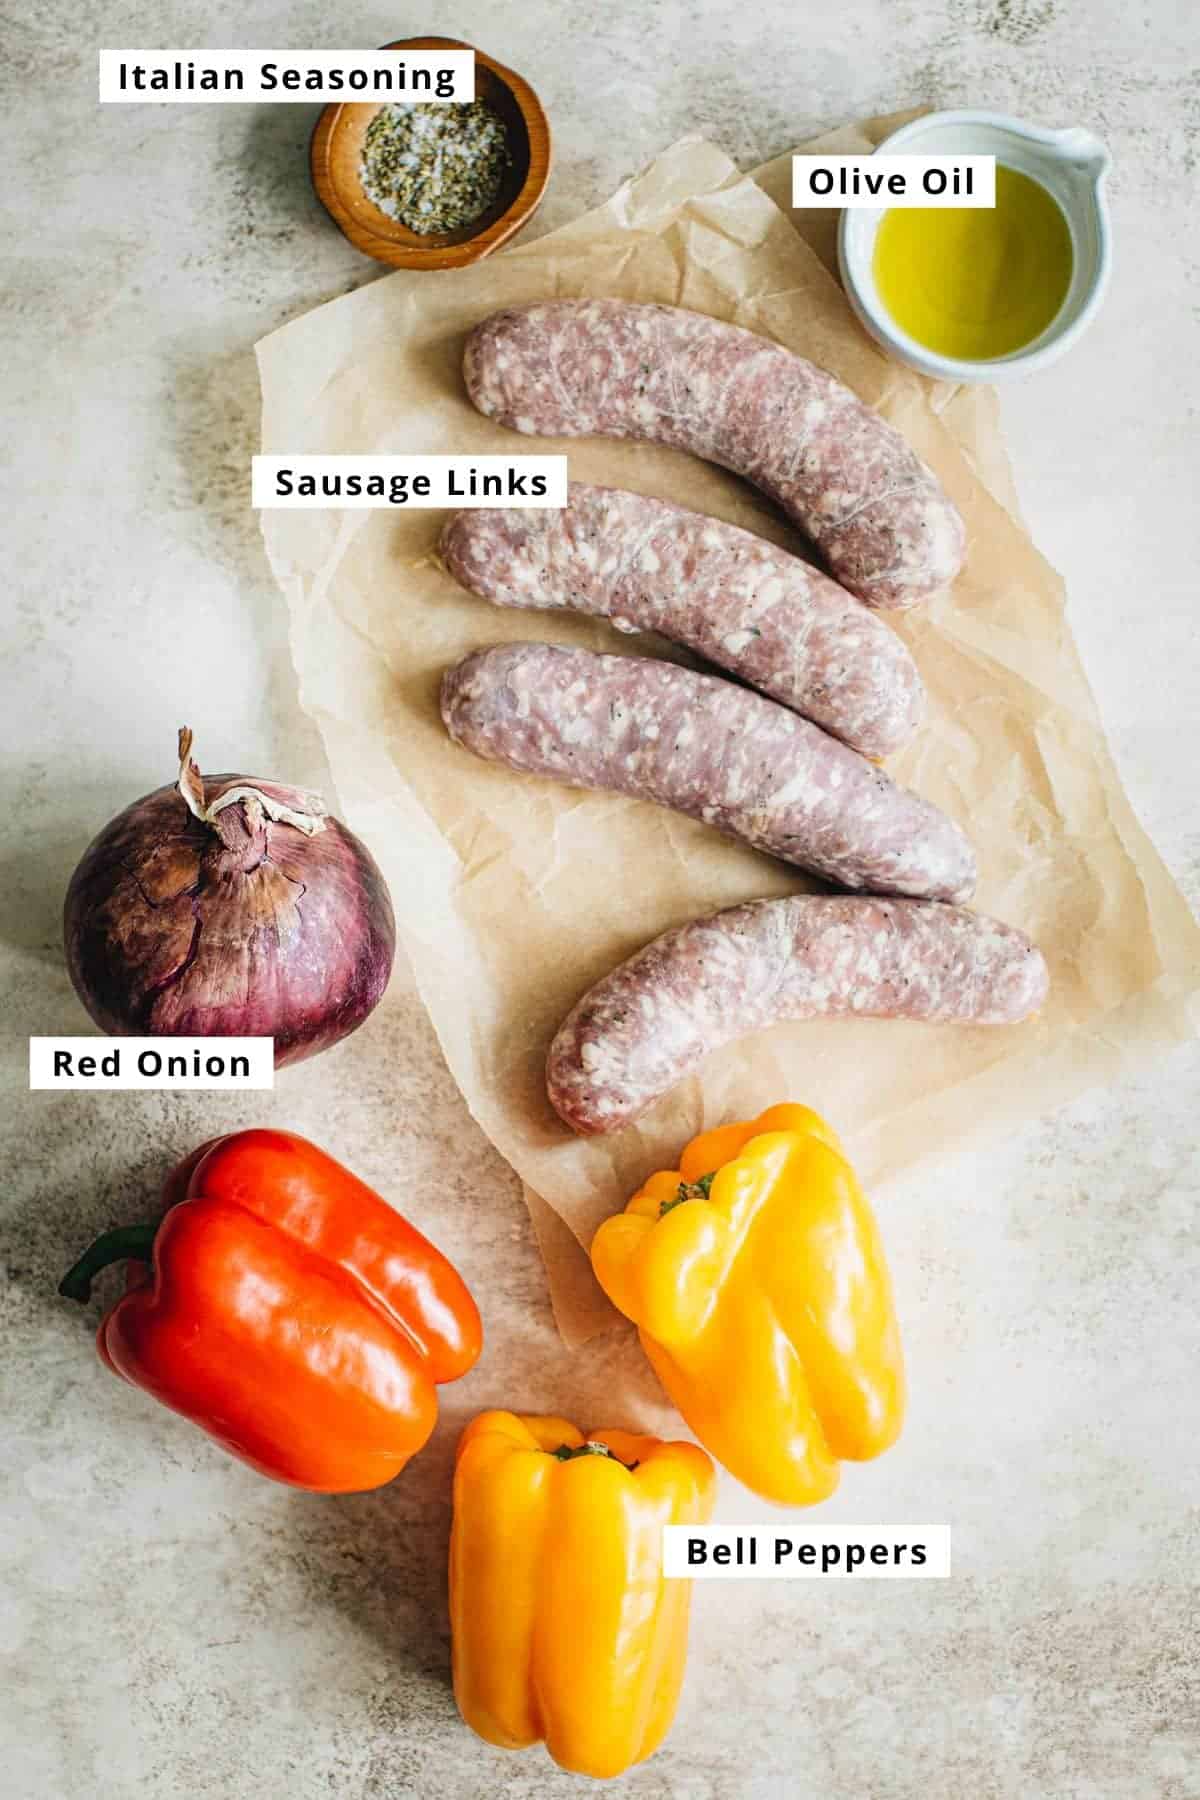 Sausage and peppers ingredients.